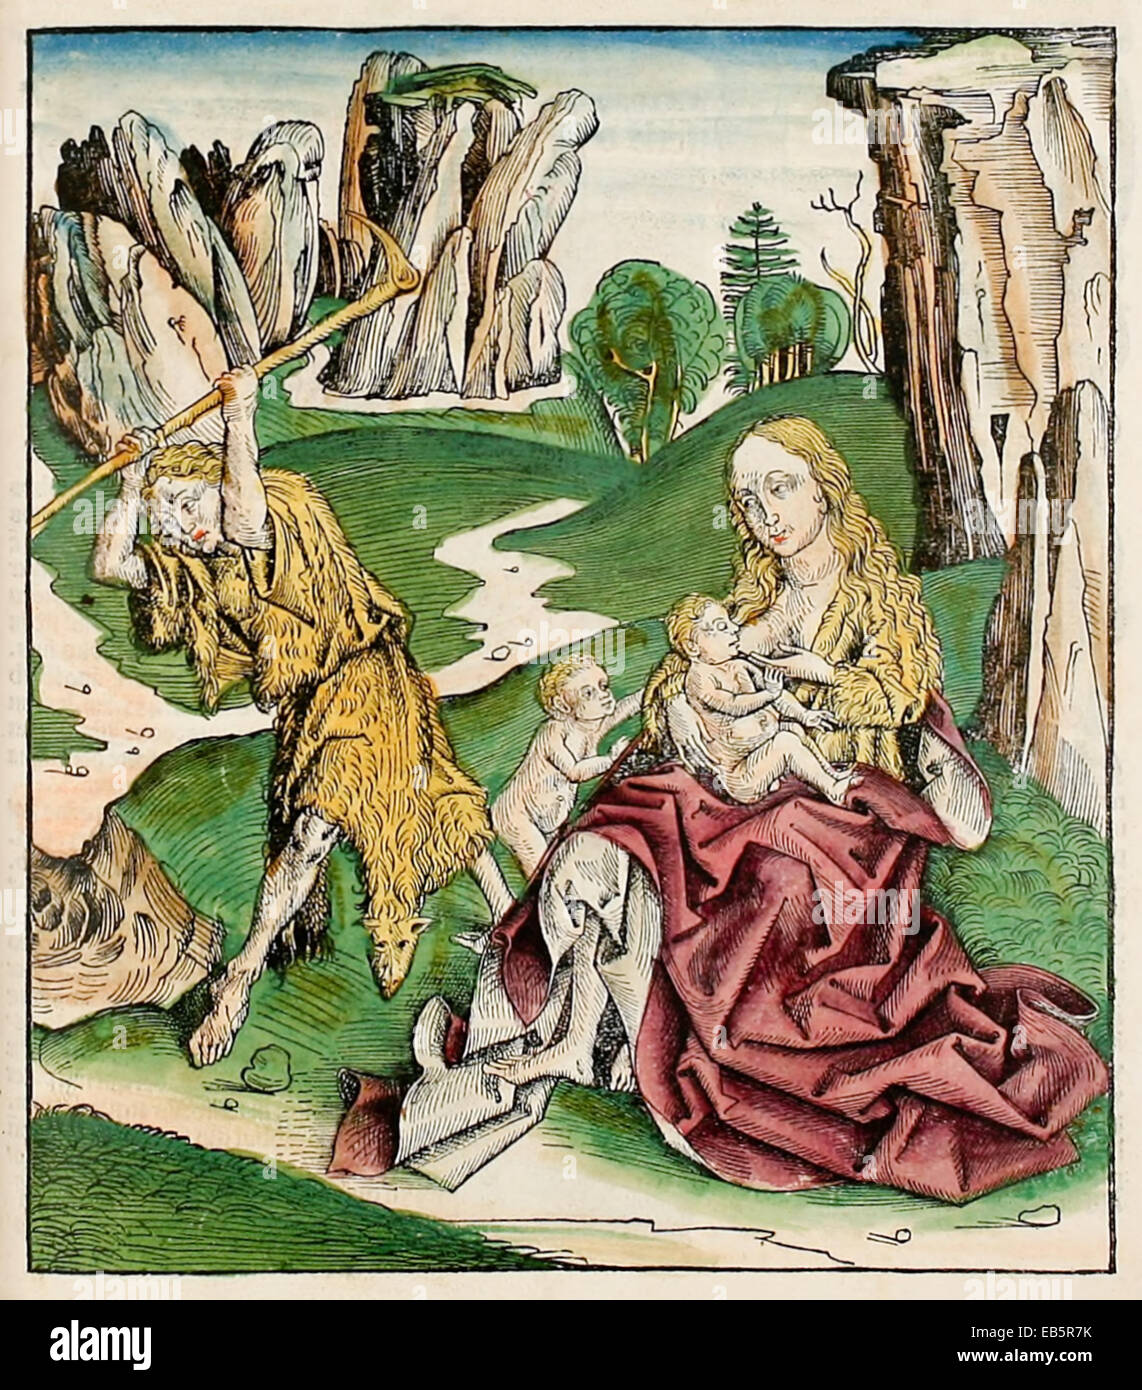 Adam works hard as Eve suckles Cain and Abel after the expulsion from Eden. From 'Nuremberg Chronicle' or 'Liber Chronicarum' by Hartmann Schedel (1440-1514). See description for more information. Stock Photo